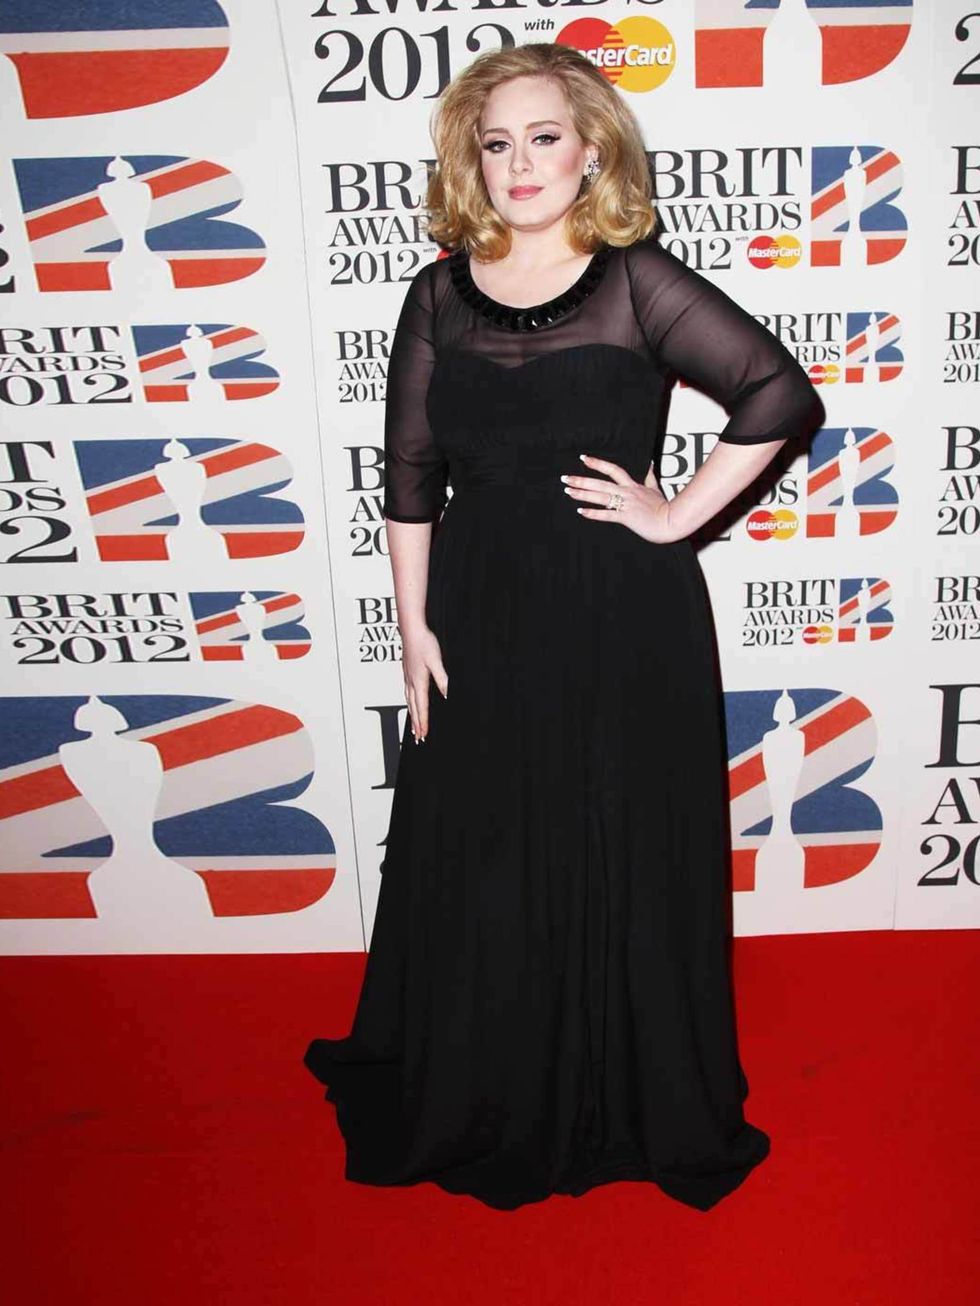 <p><a href="http://www.elleuk.com/star-style/celebrity-style-files/adele">Adele</a> wearing <a href="http://www.elleuk.com/catwalk/designer-a-z/burberry-prorsum/autumn-winter-2012">Burberry Prorsum</a> and De Beers jewellery on the red carpet at the 2012 